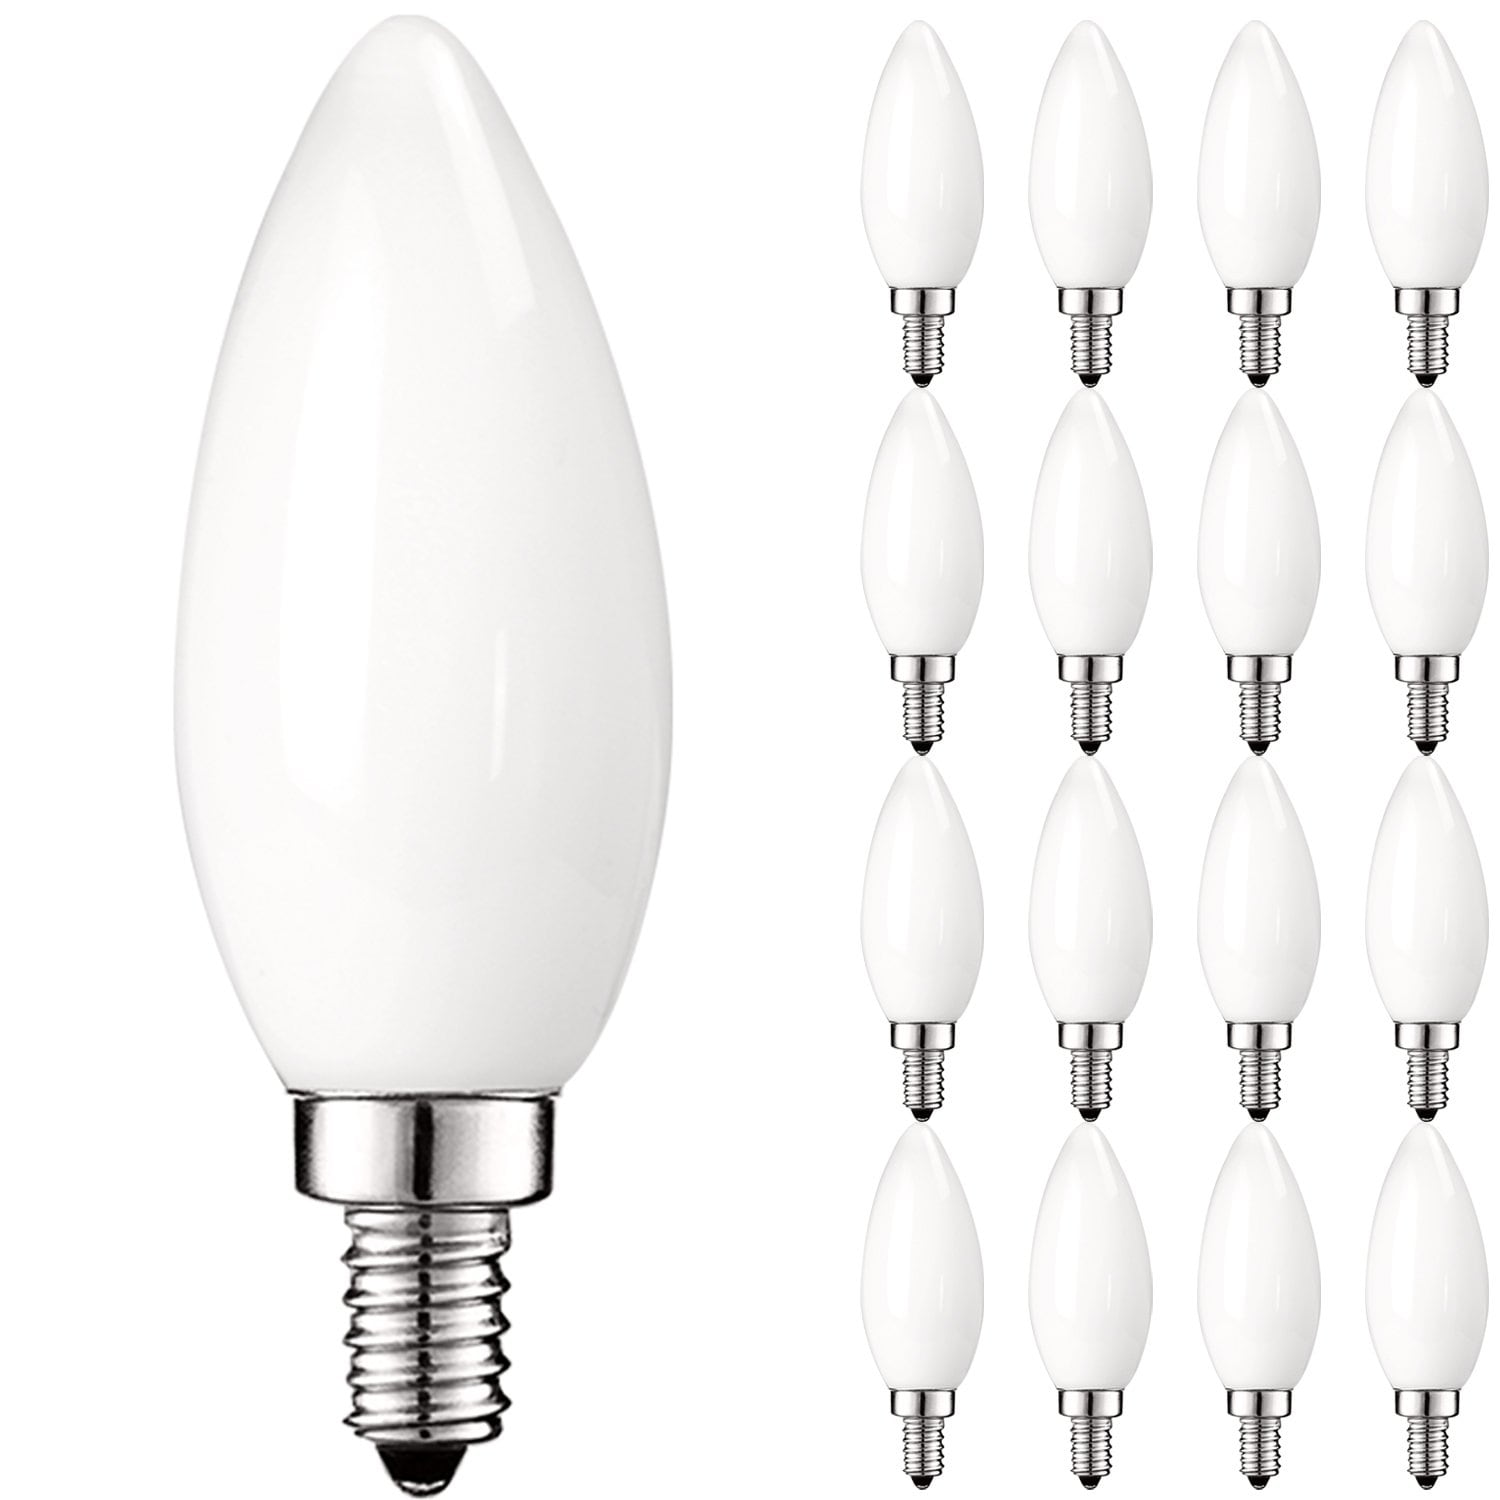 Smart Light Bulb Dimmable 40W Equivalent WiFi Light Bulbs Compatible with Alexa and Google Home Chandelier Light Bulbs Great for Ceiling Fan 2700K 2-Pack Smart Bulb Candelabra LED Bulb